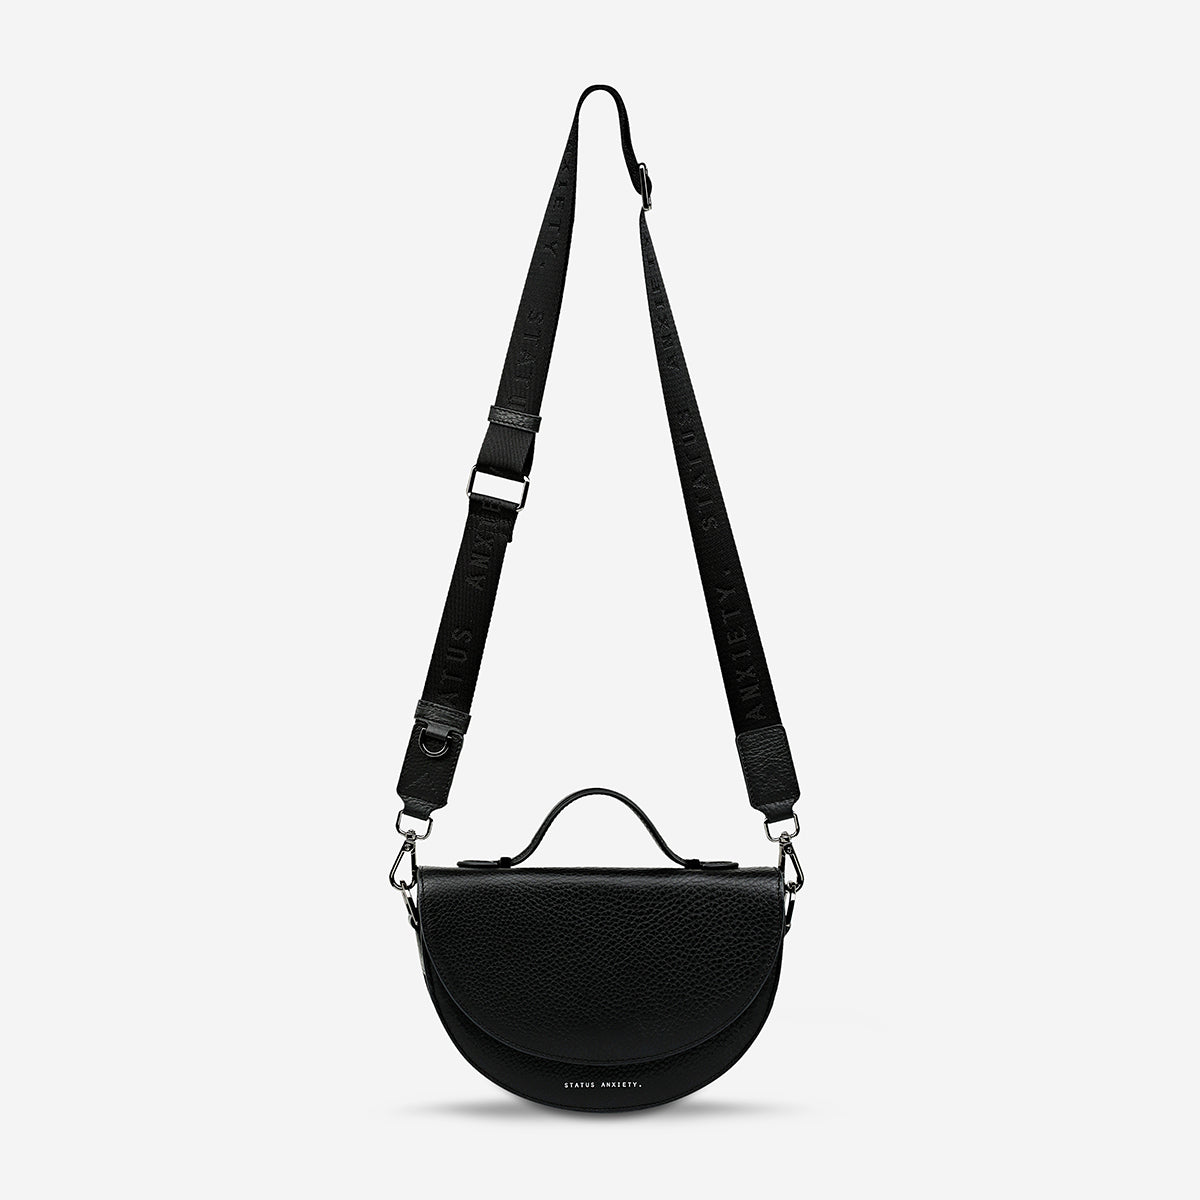 Status Anxiety All Nighter With Webbed Strap Women's Leather Crossbody Bag Black